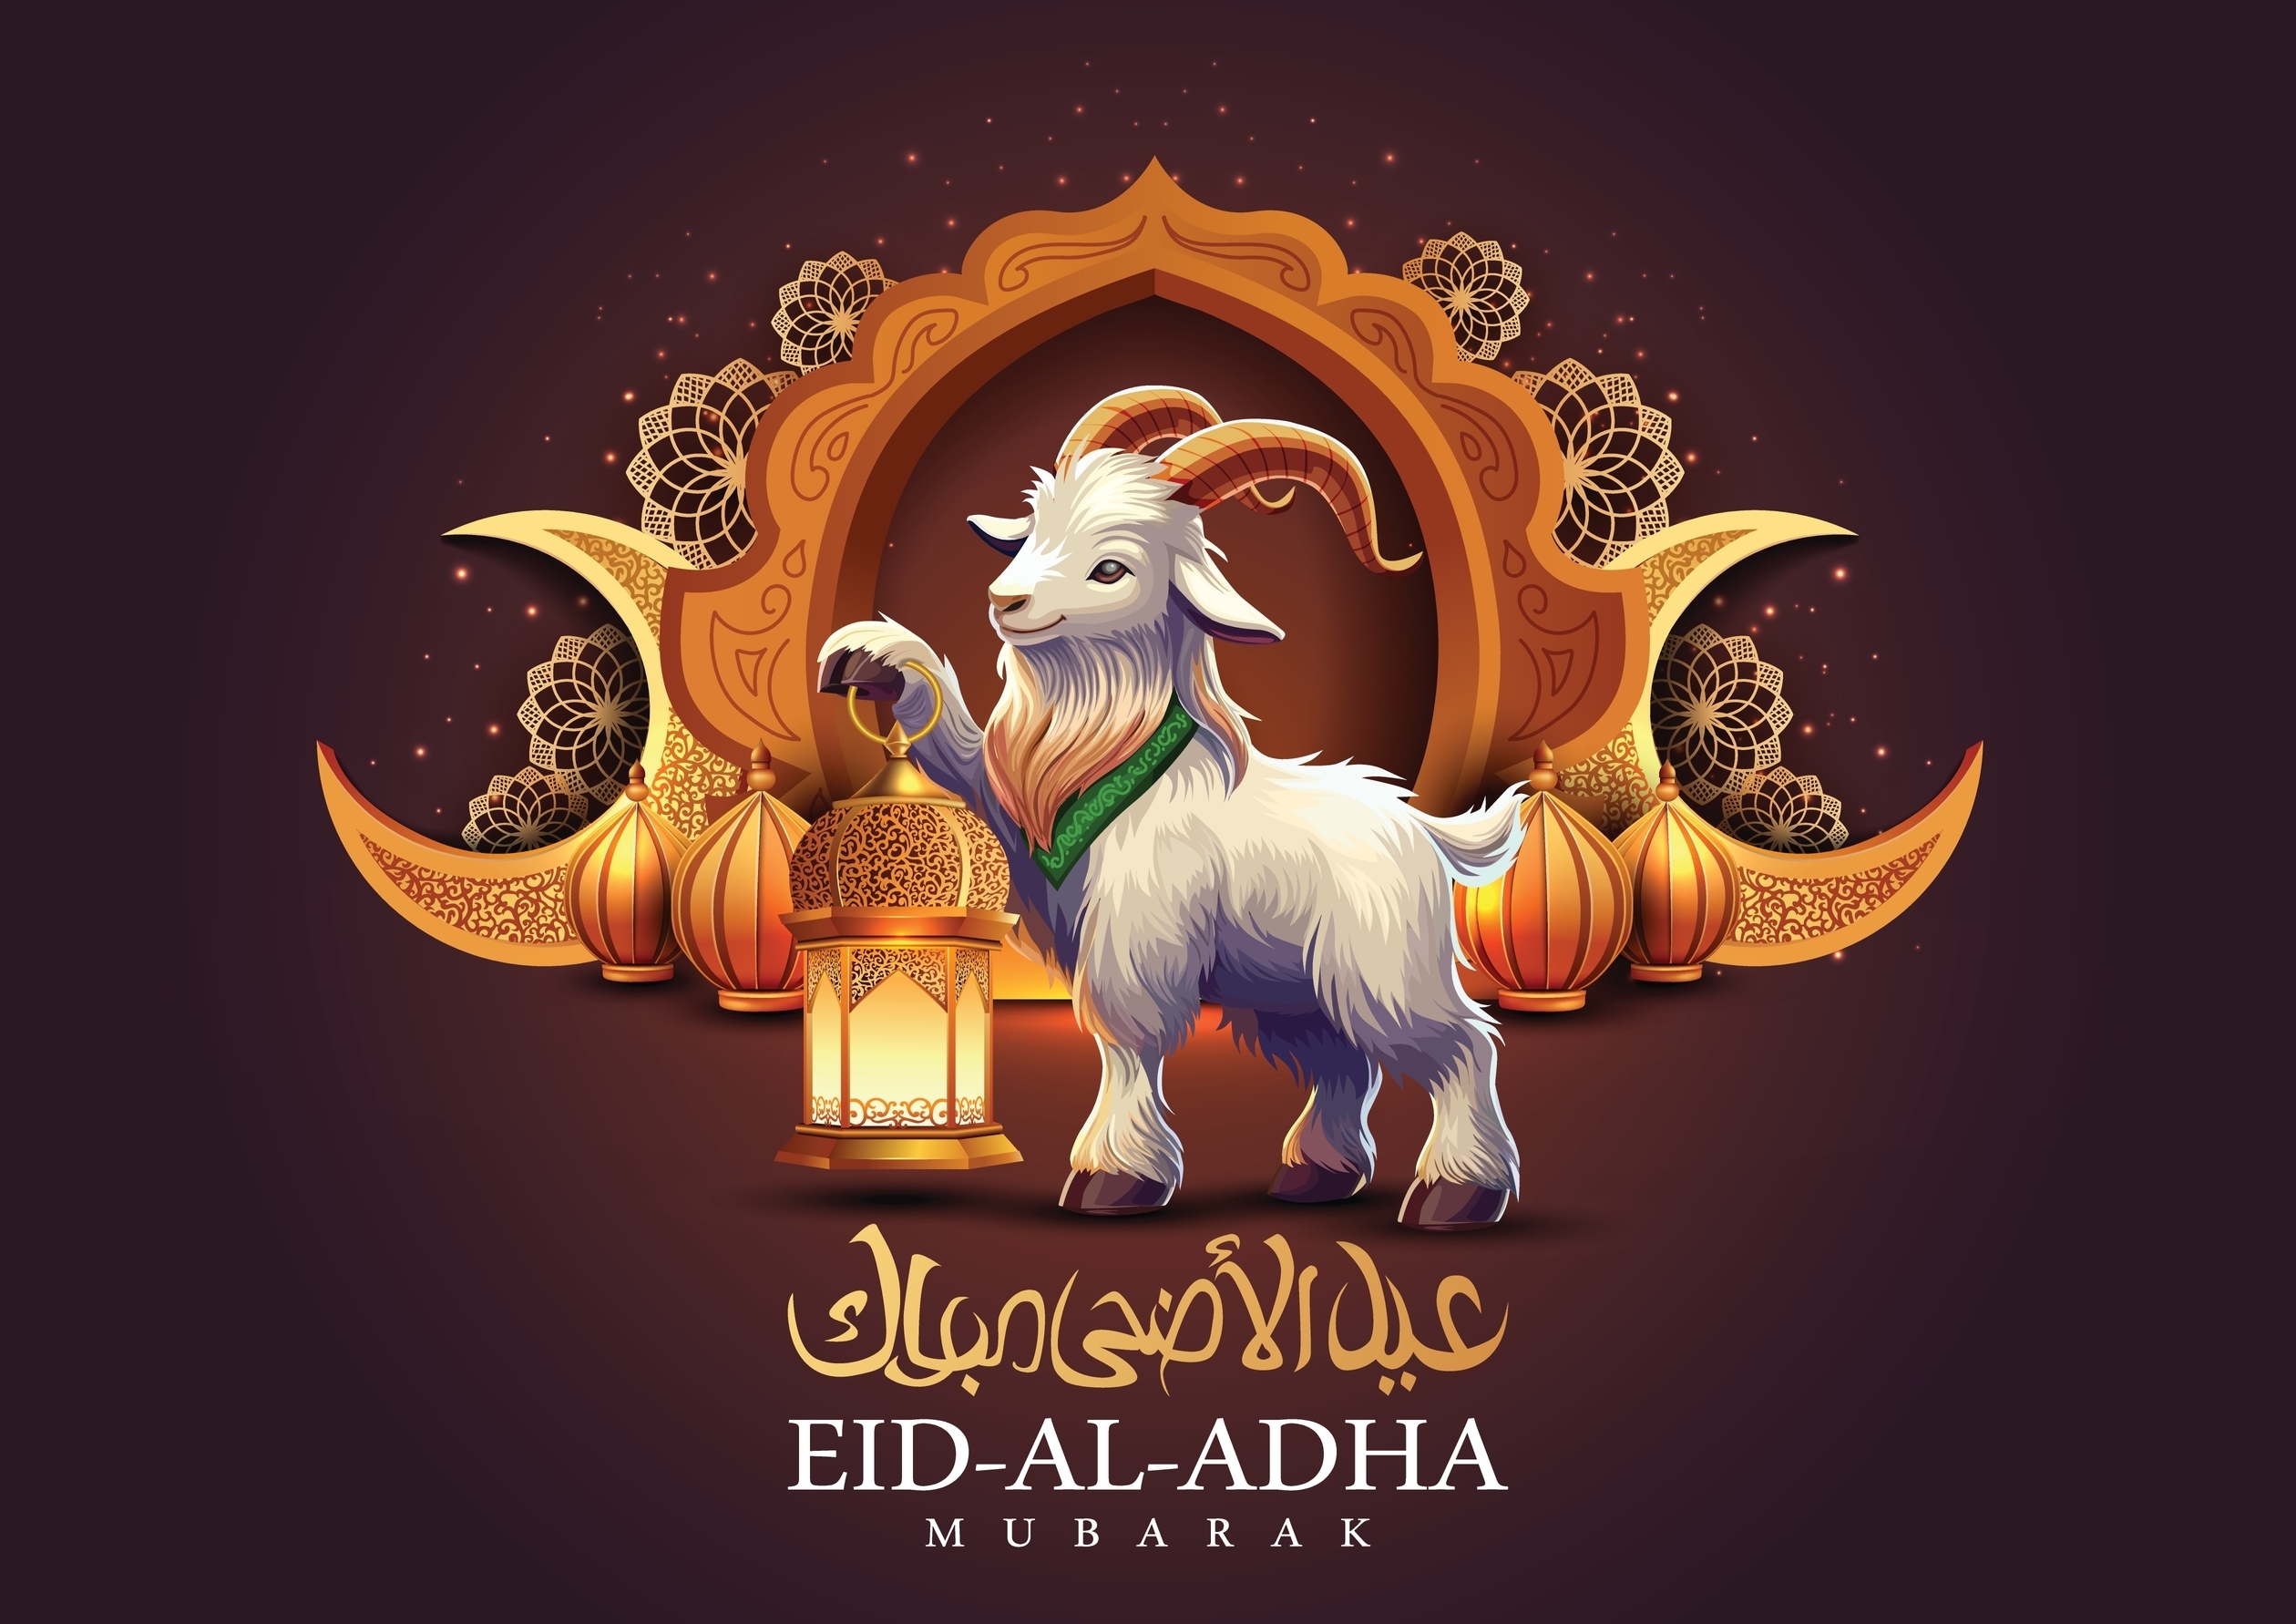 Happy Eid-ul-Adha 2024: Bakrid Mubarak Wishes, Images, Greetings, Quotes, Messages and WhatsApp Status to Share on Eid al-Adha! - News18